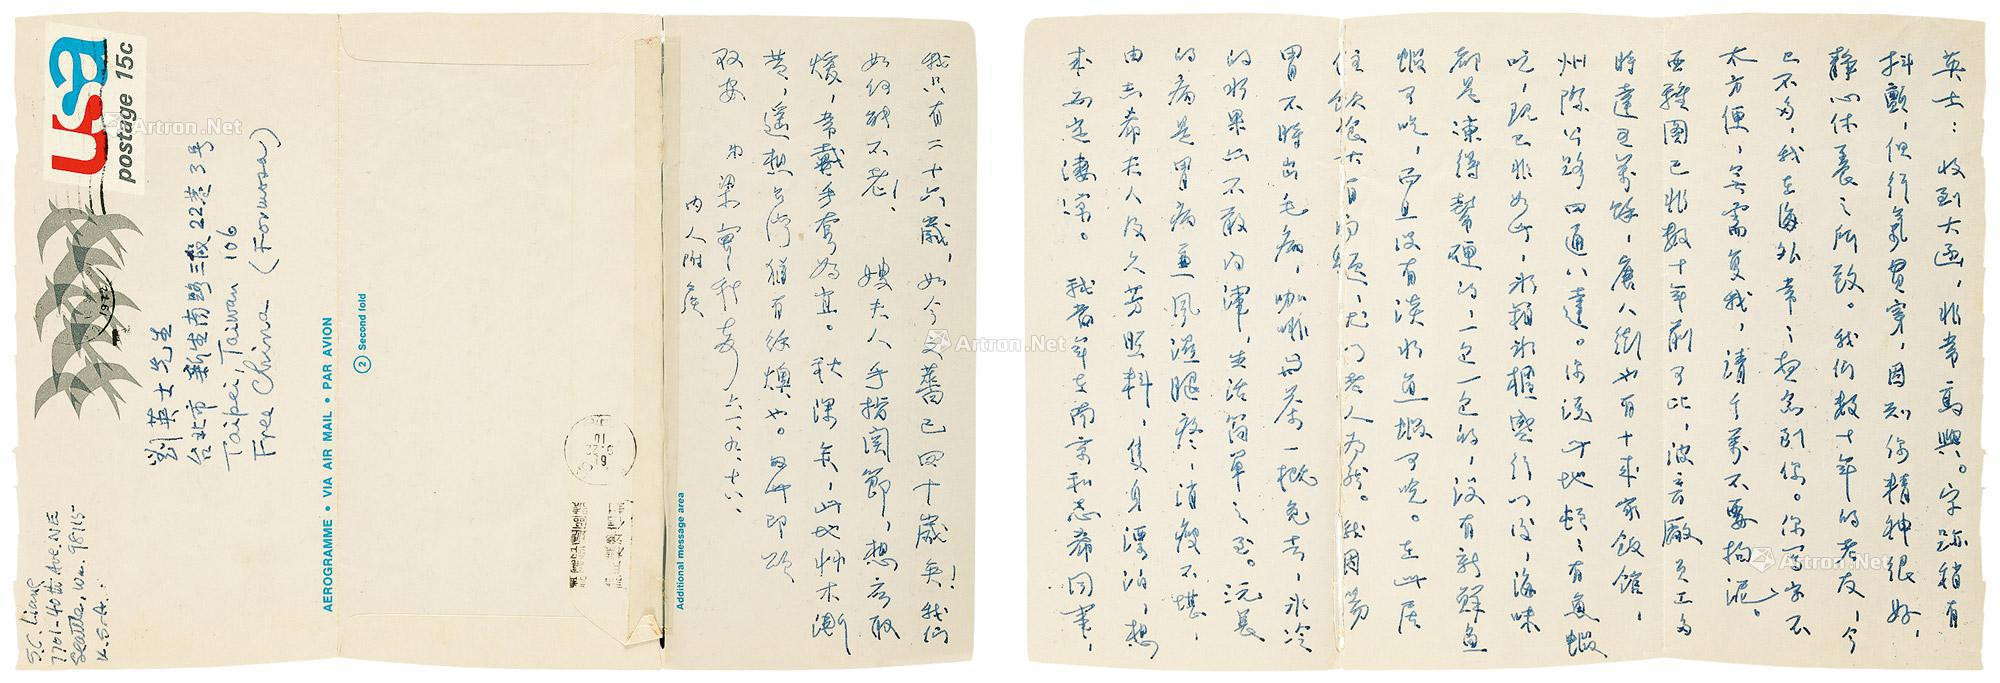 One letter of one page by Liang Shiqiu to Liu Yingshi